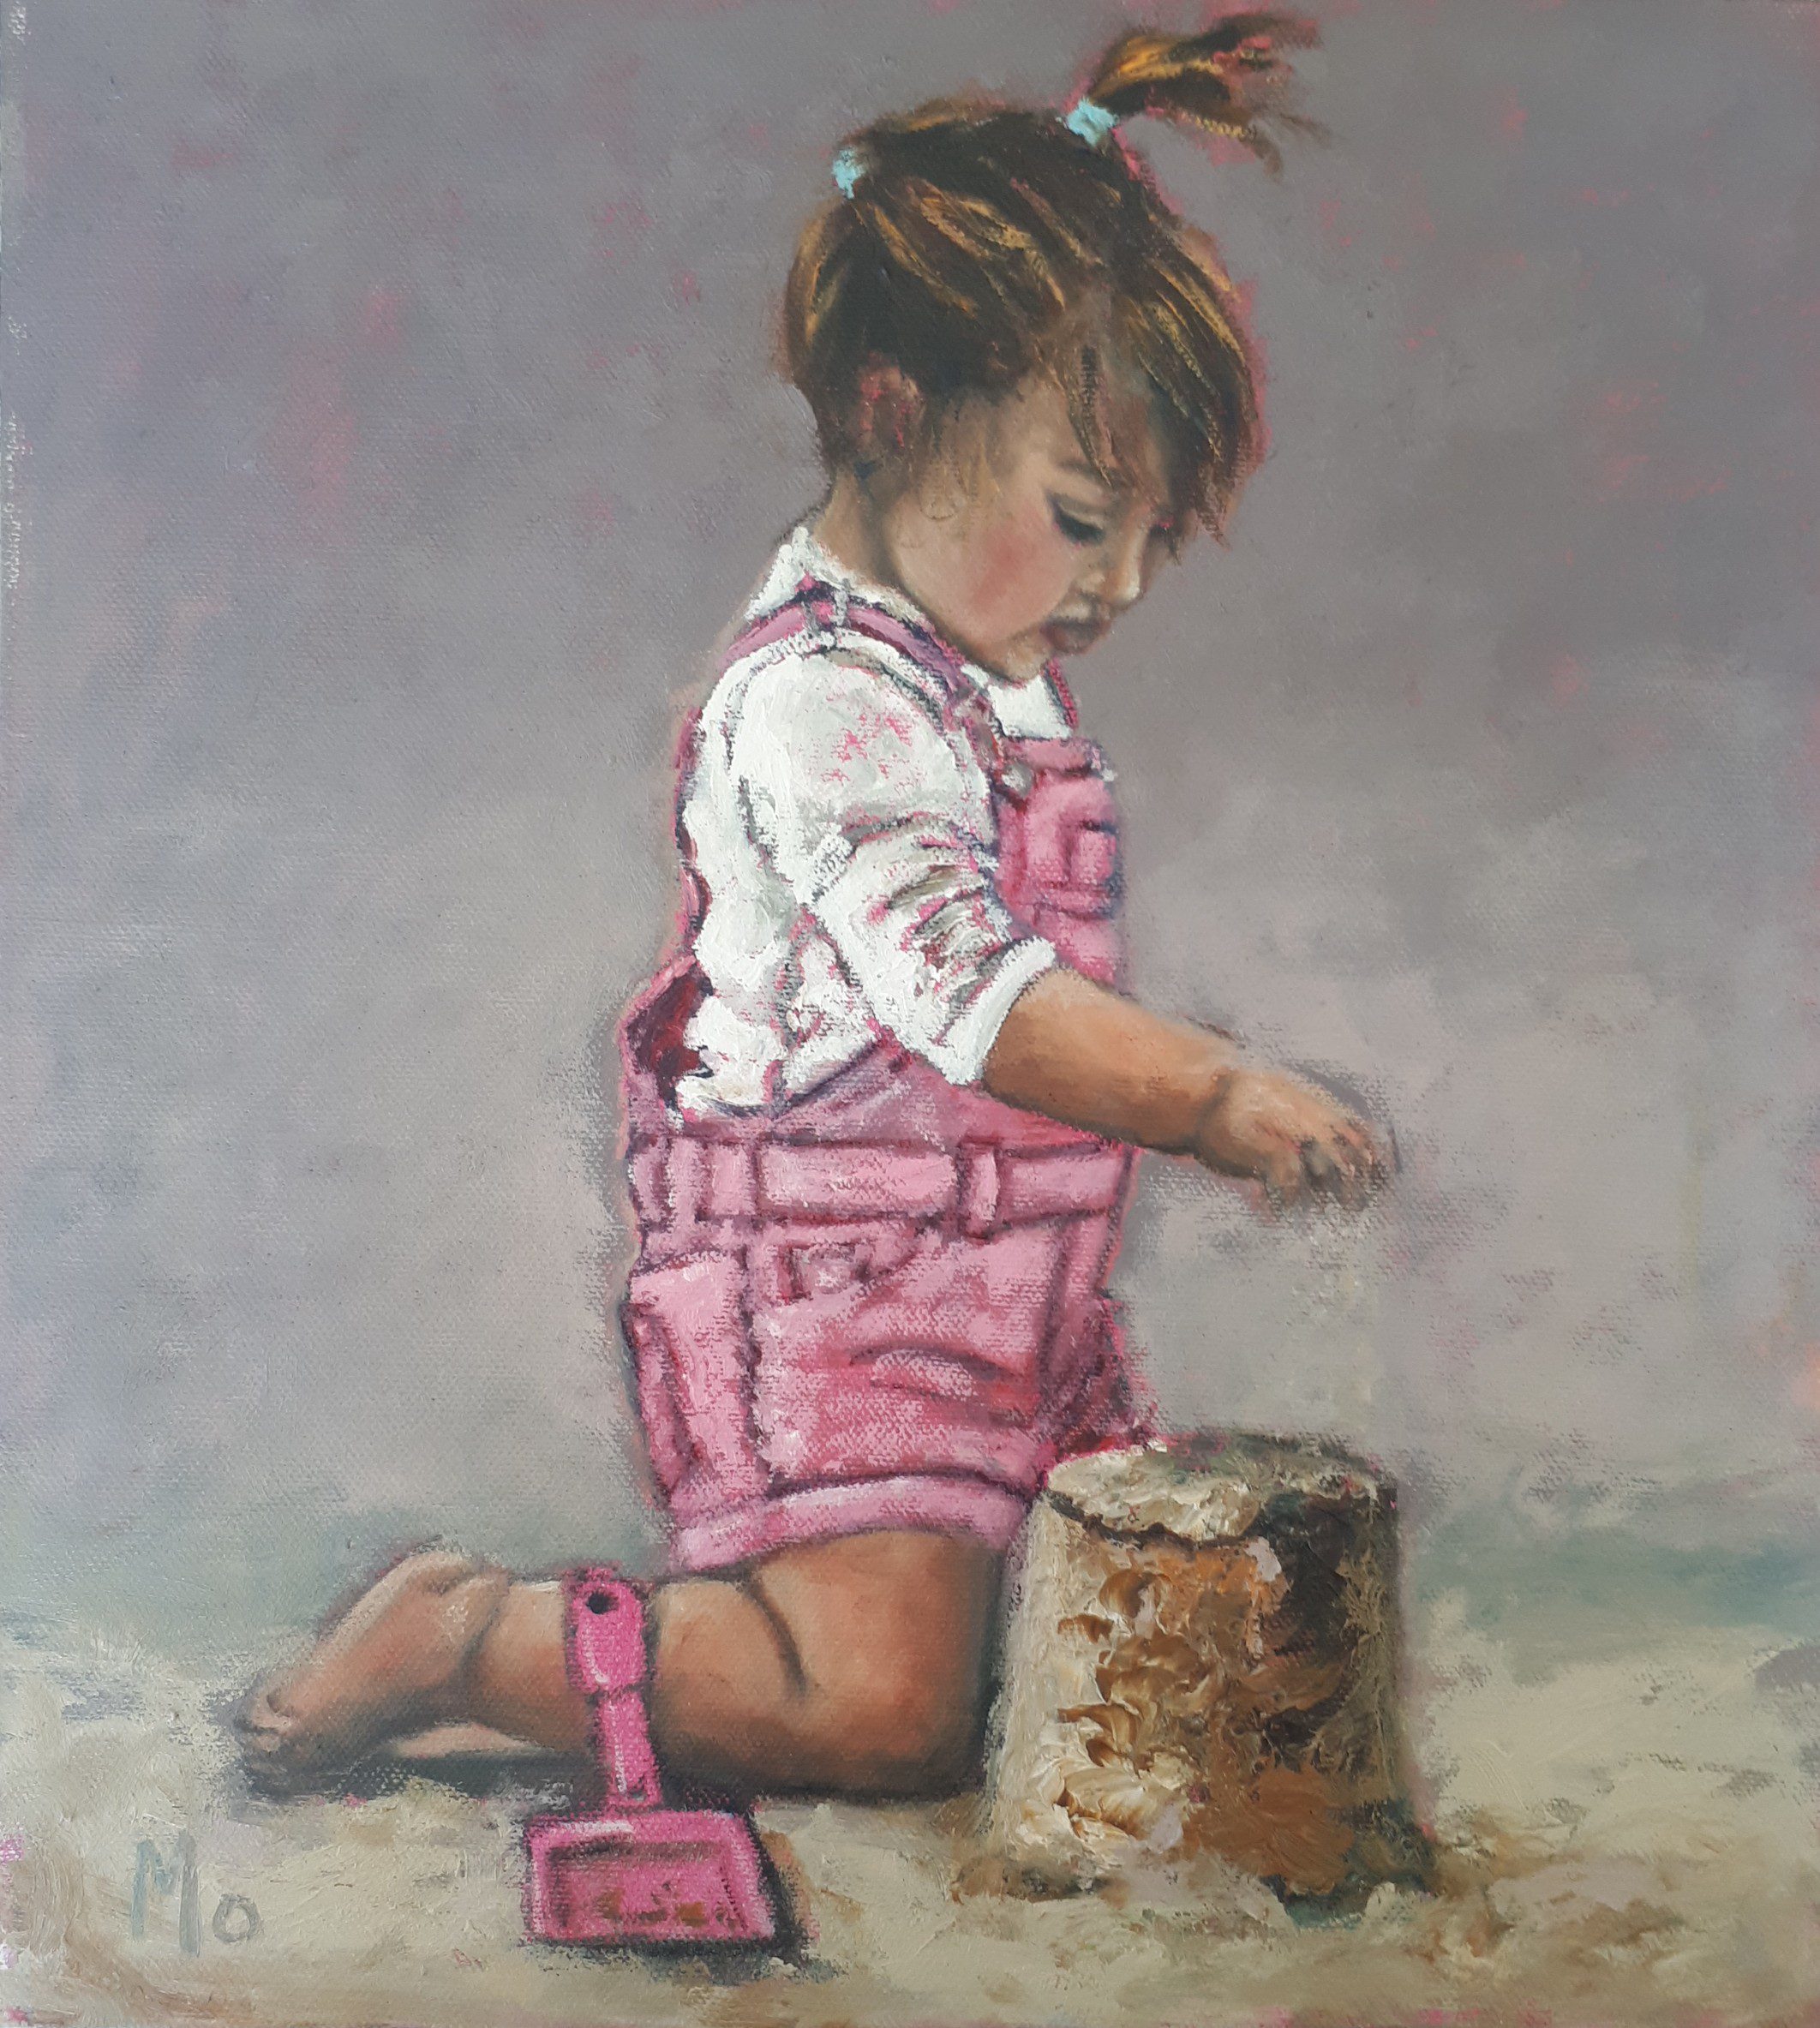 Little girl pink dungarees and pigtails making sandcastle